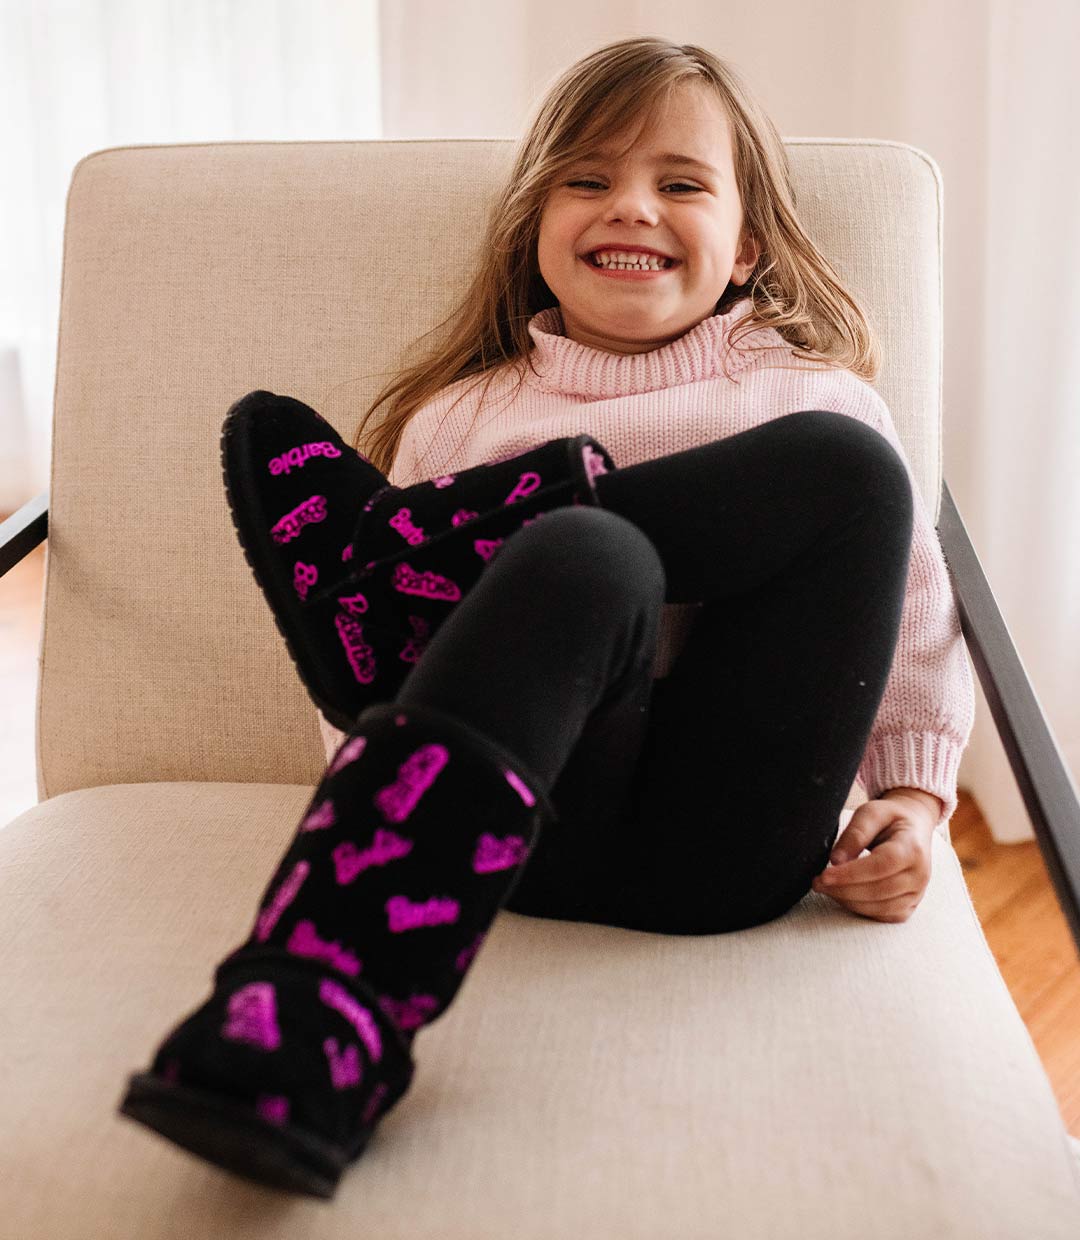 Young girl sitting on seat wearing black sheepskin boots with Barbie logo print and smiling